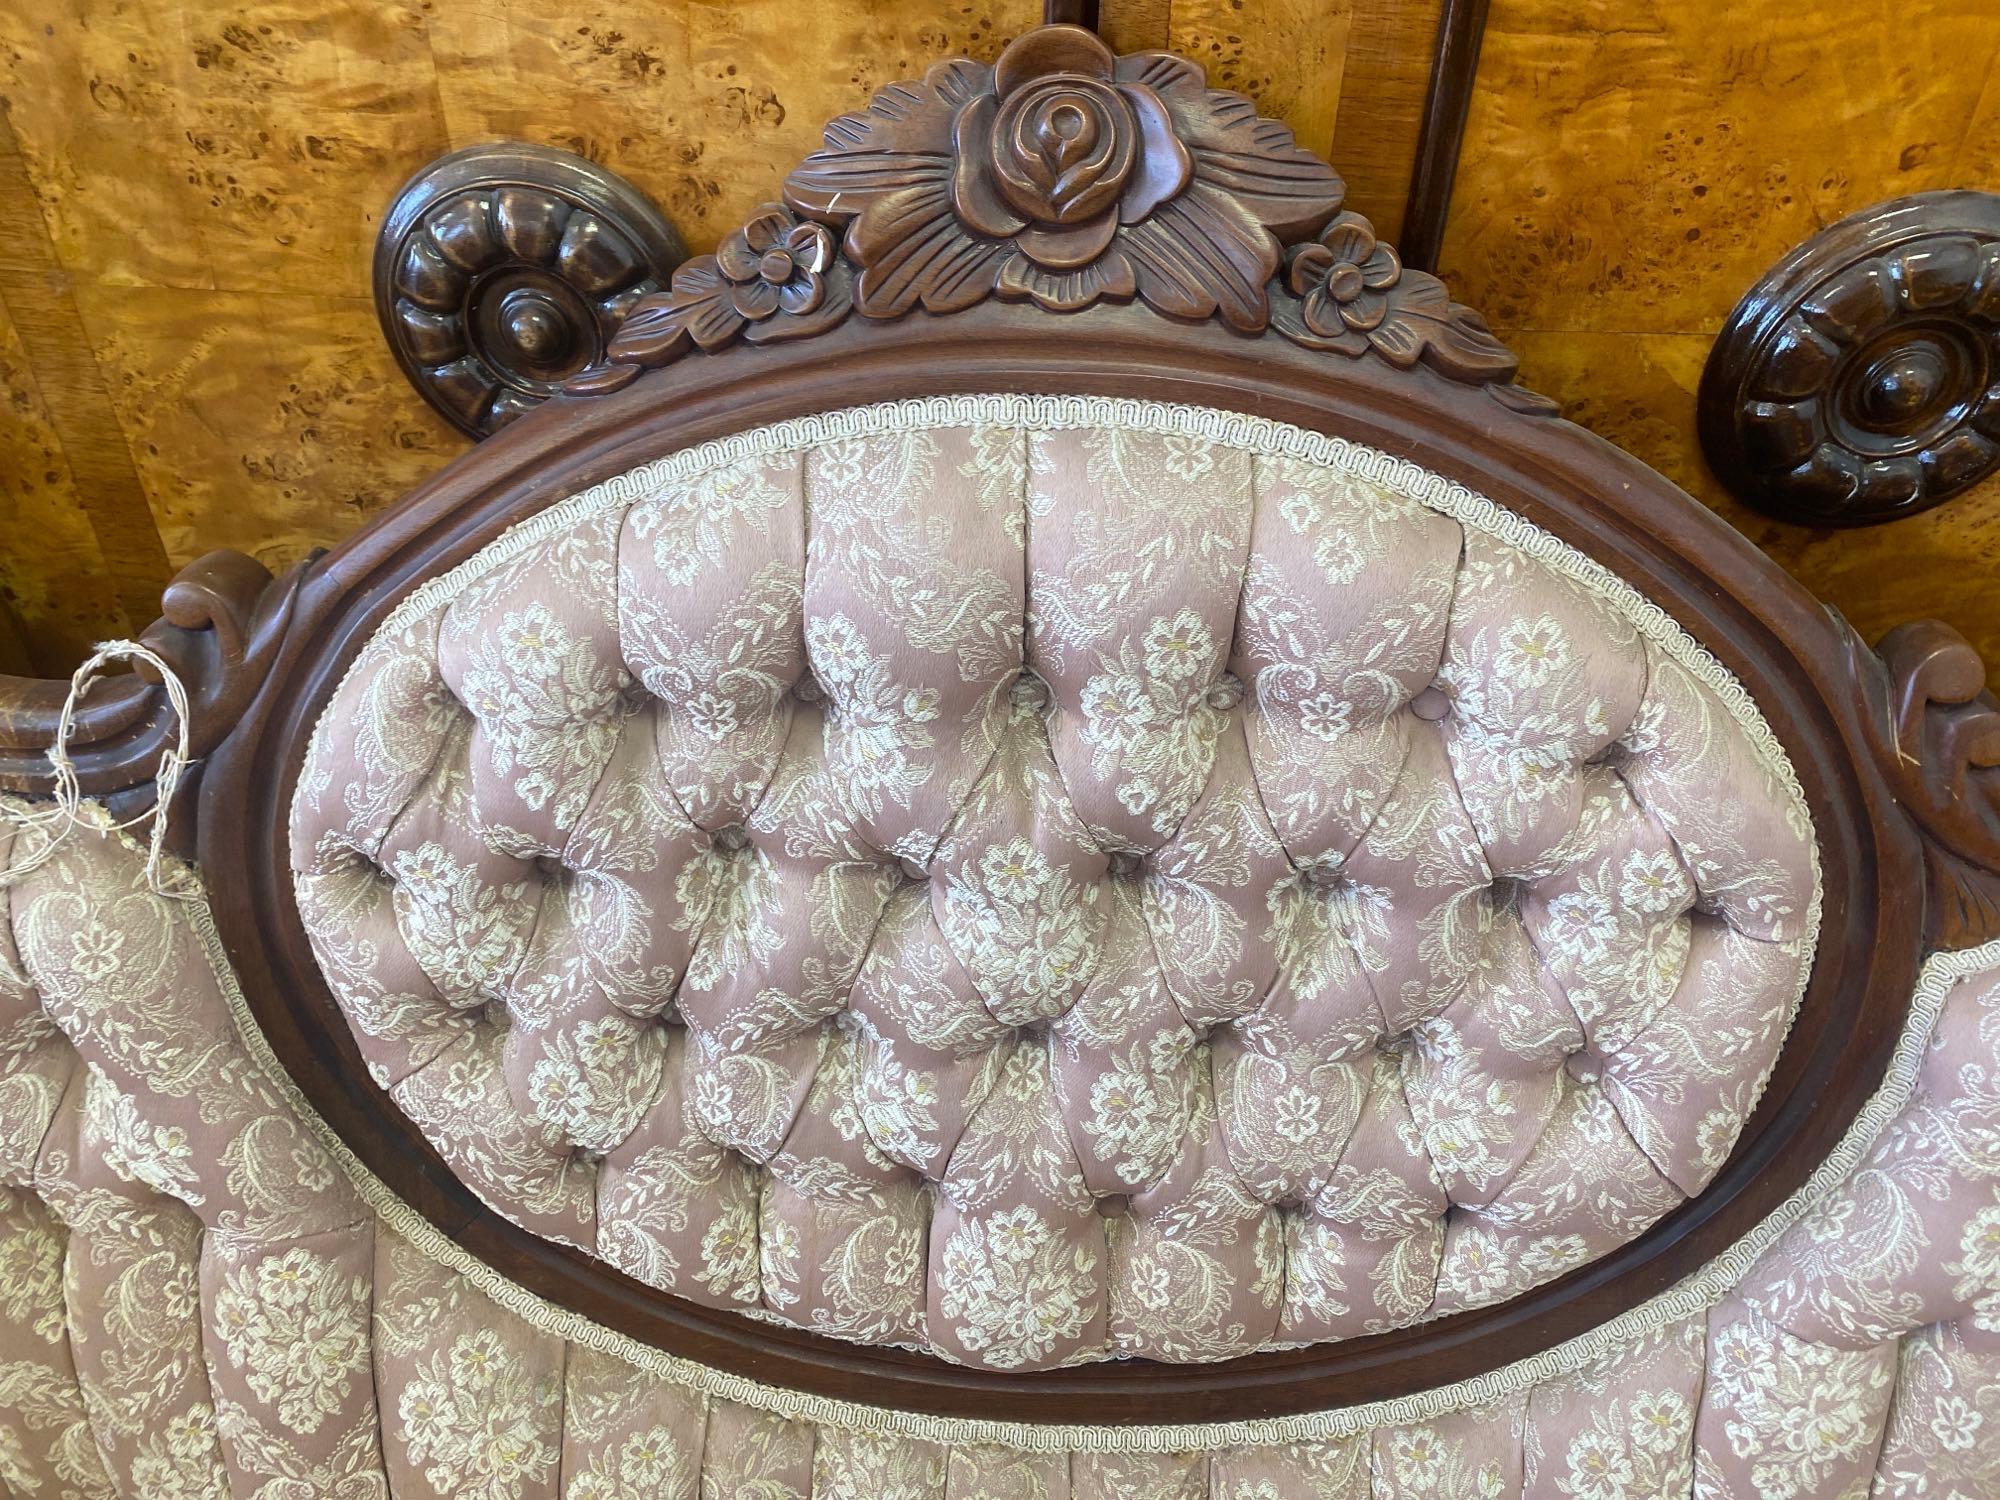 Ornate 1960s American Floral Styled Carved Wood Sofa